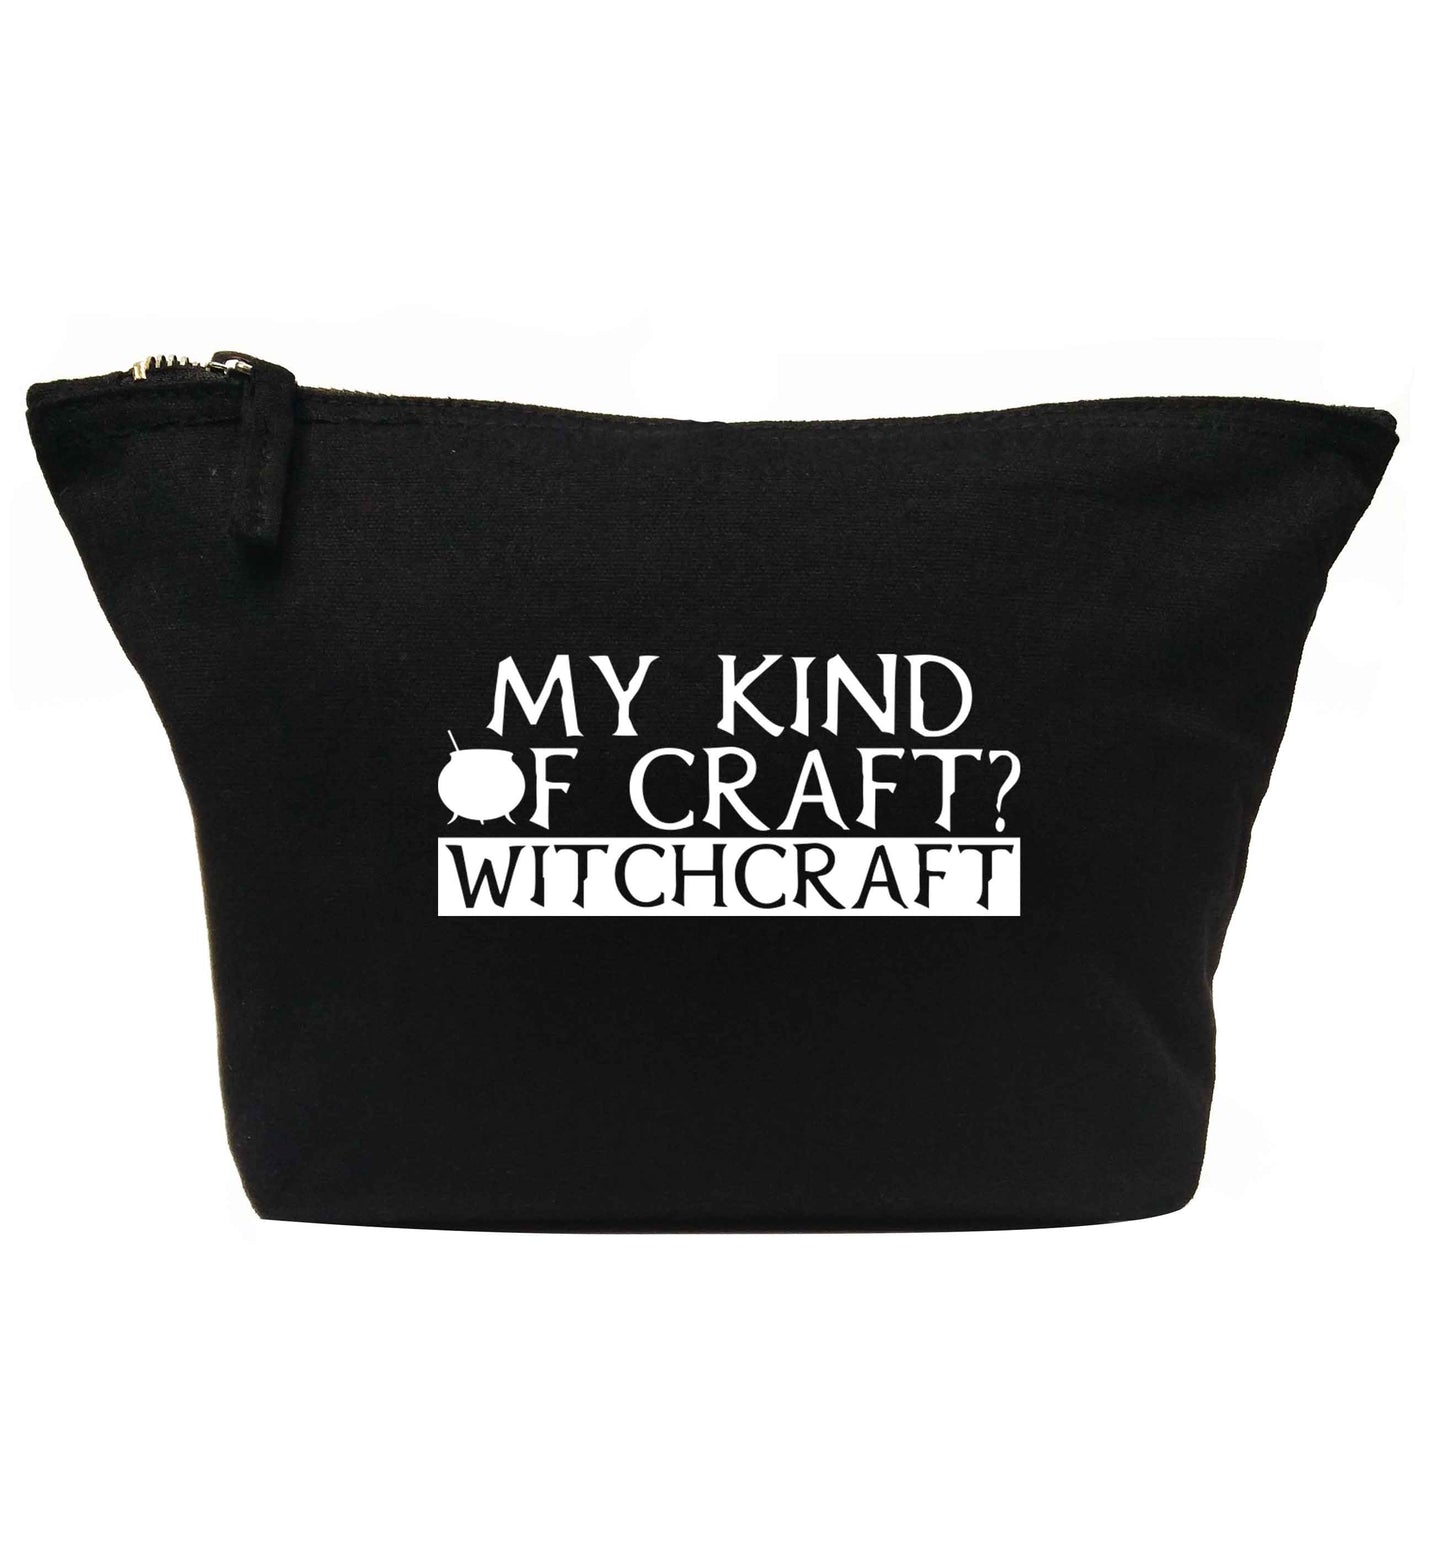 My king of craft? witchcraft  | Makeup / wash bag